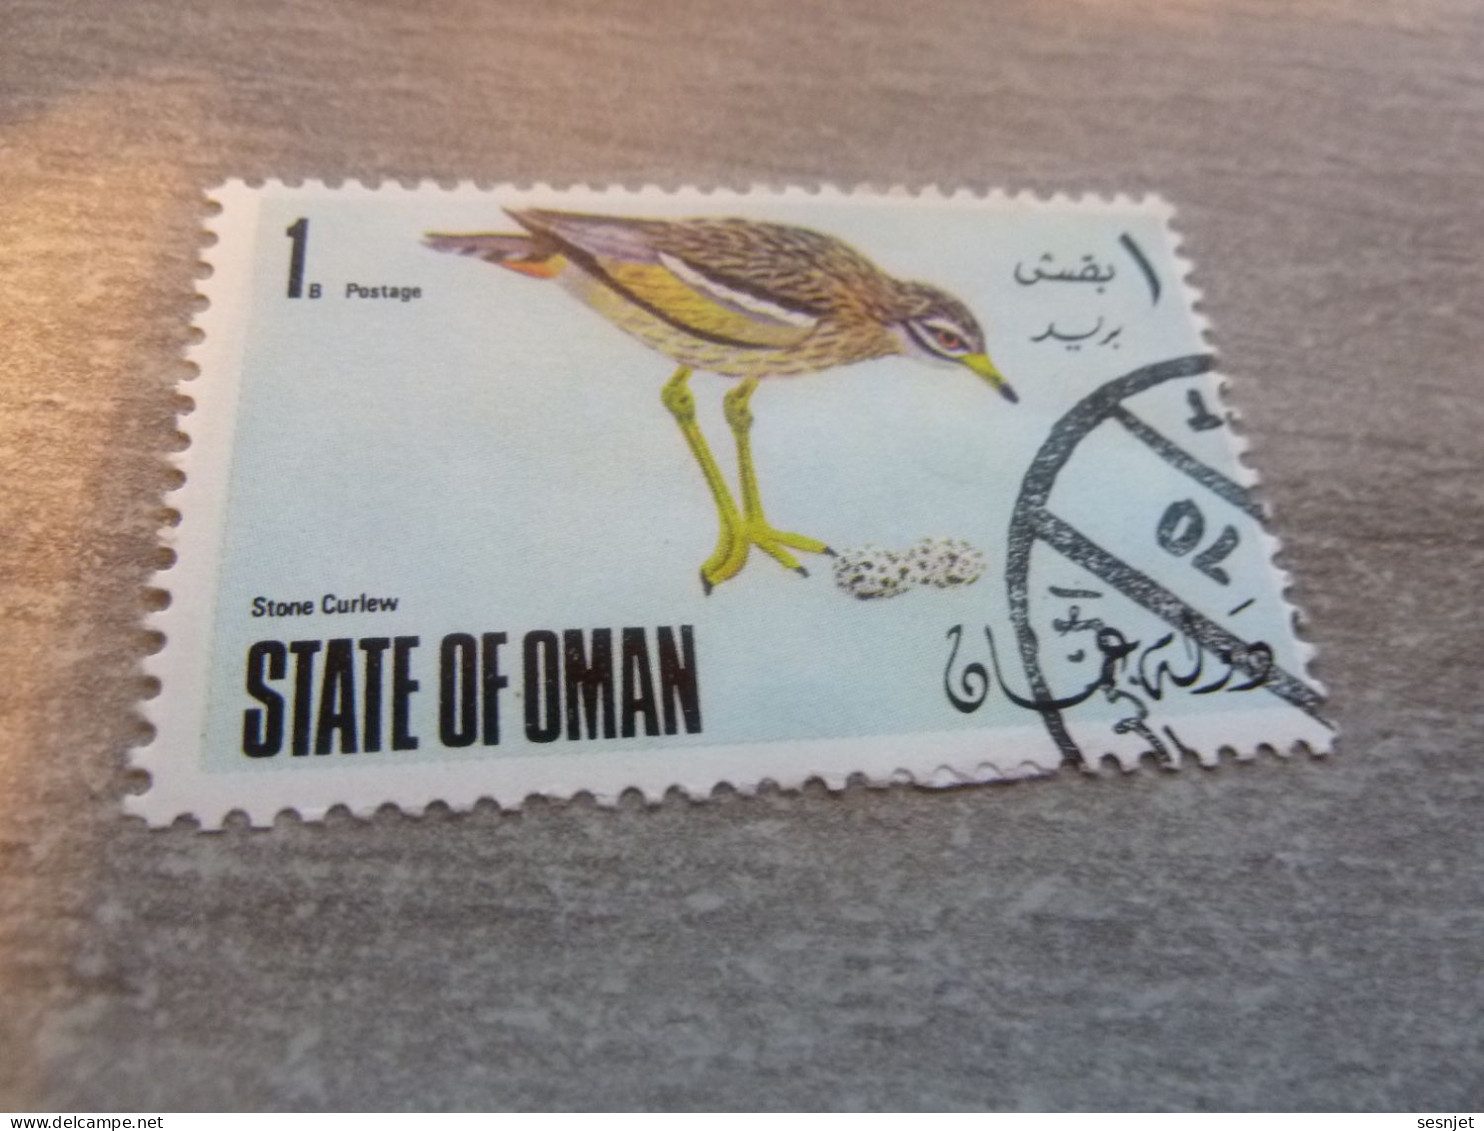 State Of Oman - Stone Curlew -  Val 1 B - Postage - Polychrome - Oblitéré - Année 1970 - - Mussen